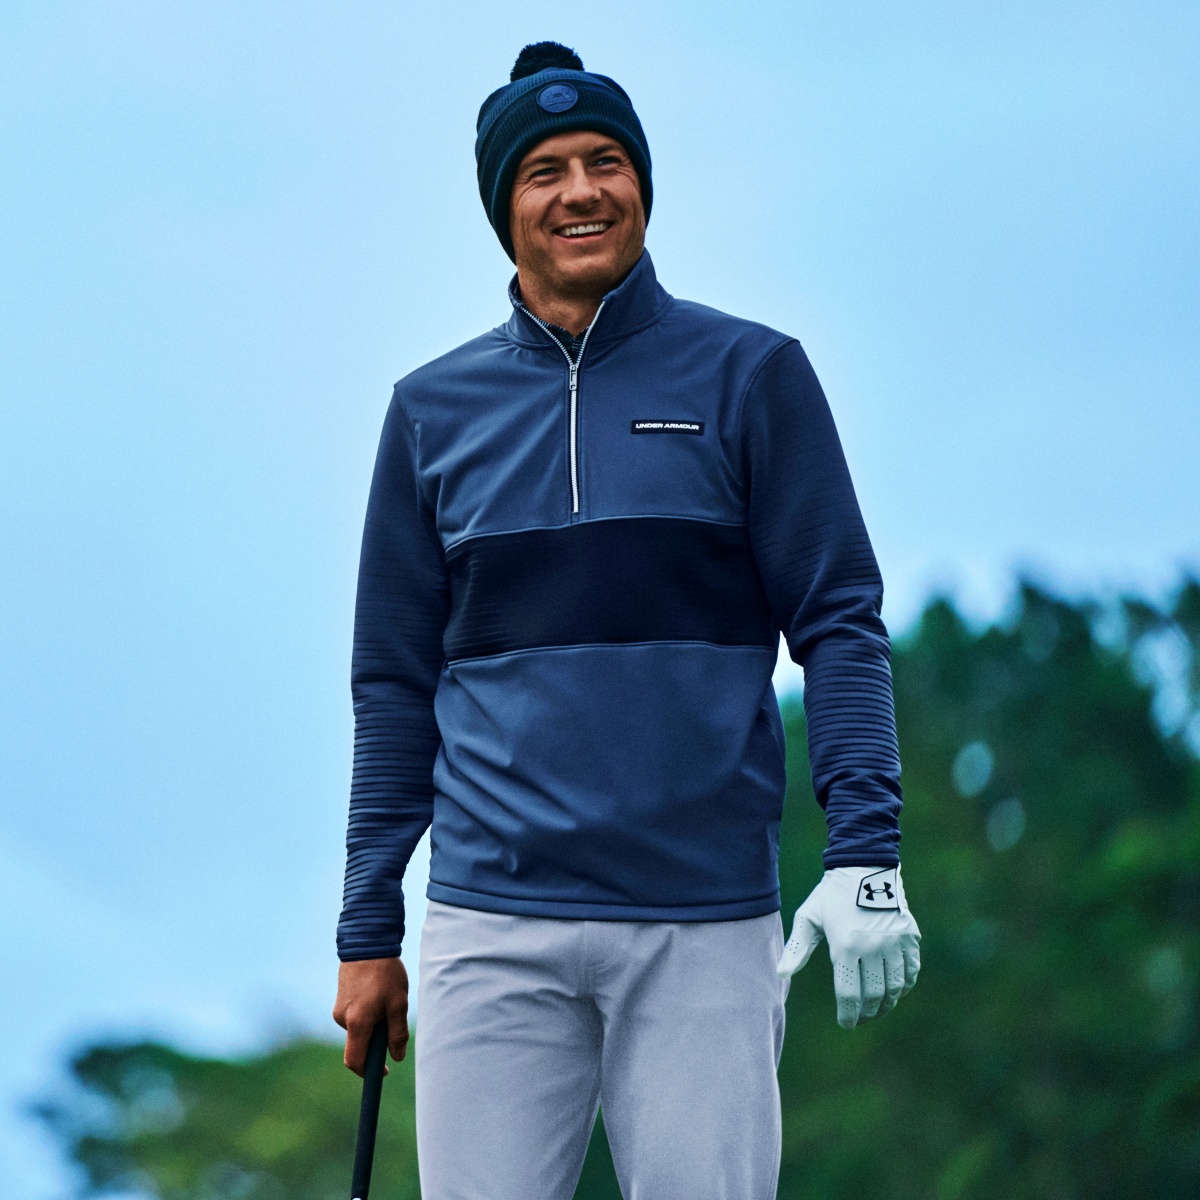 UA Cold Weather Golf Kit - Extend Your Season Built for golfers who refuse to let cold, wet weather keep them off the course - the all new UA Fall/Winter 23 collection is available now at AffordableGolf.co.uk - tinyurl.com/rupbrj8e